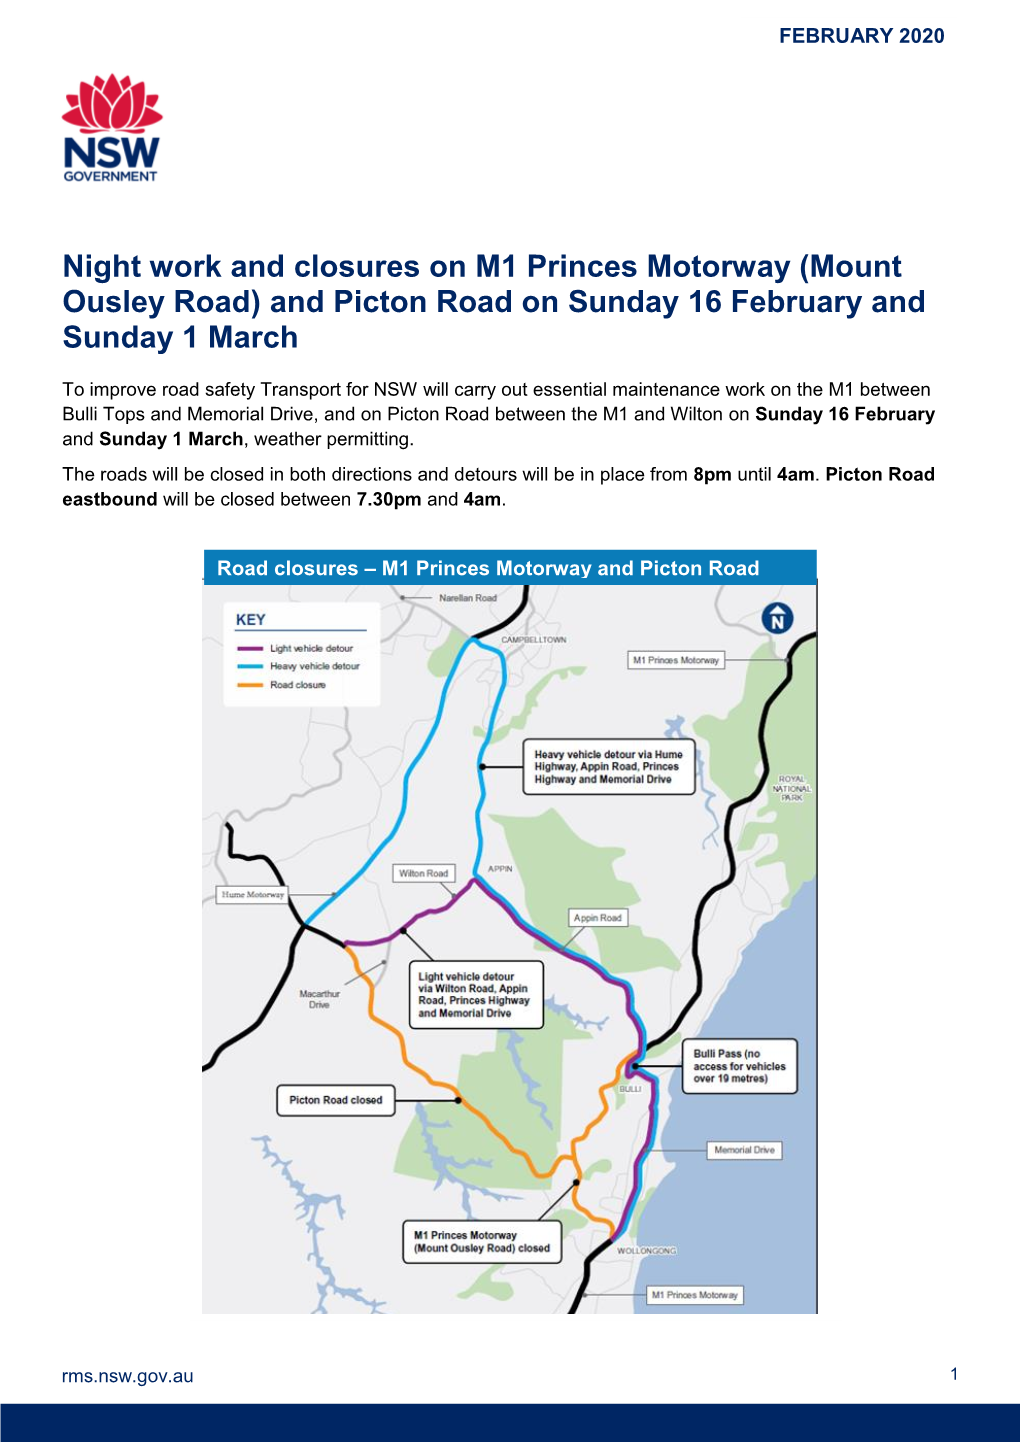 Night Work and Closures on M1 Princes Motorway (Mount Ousley Road) and Picton Road on Sunday 16 February and Sunday 1 March